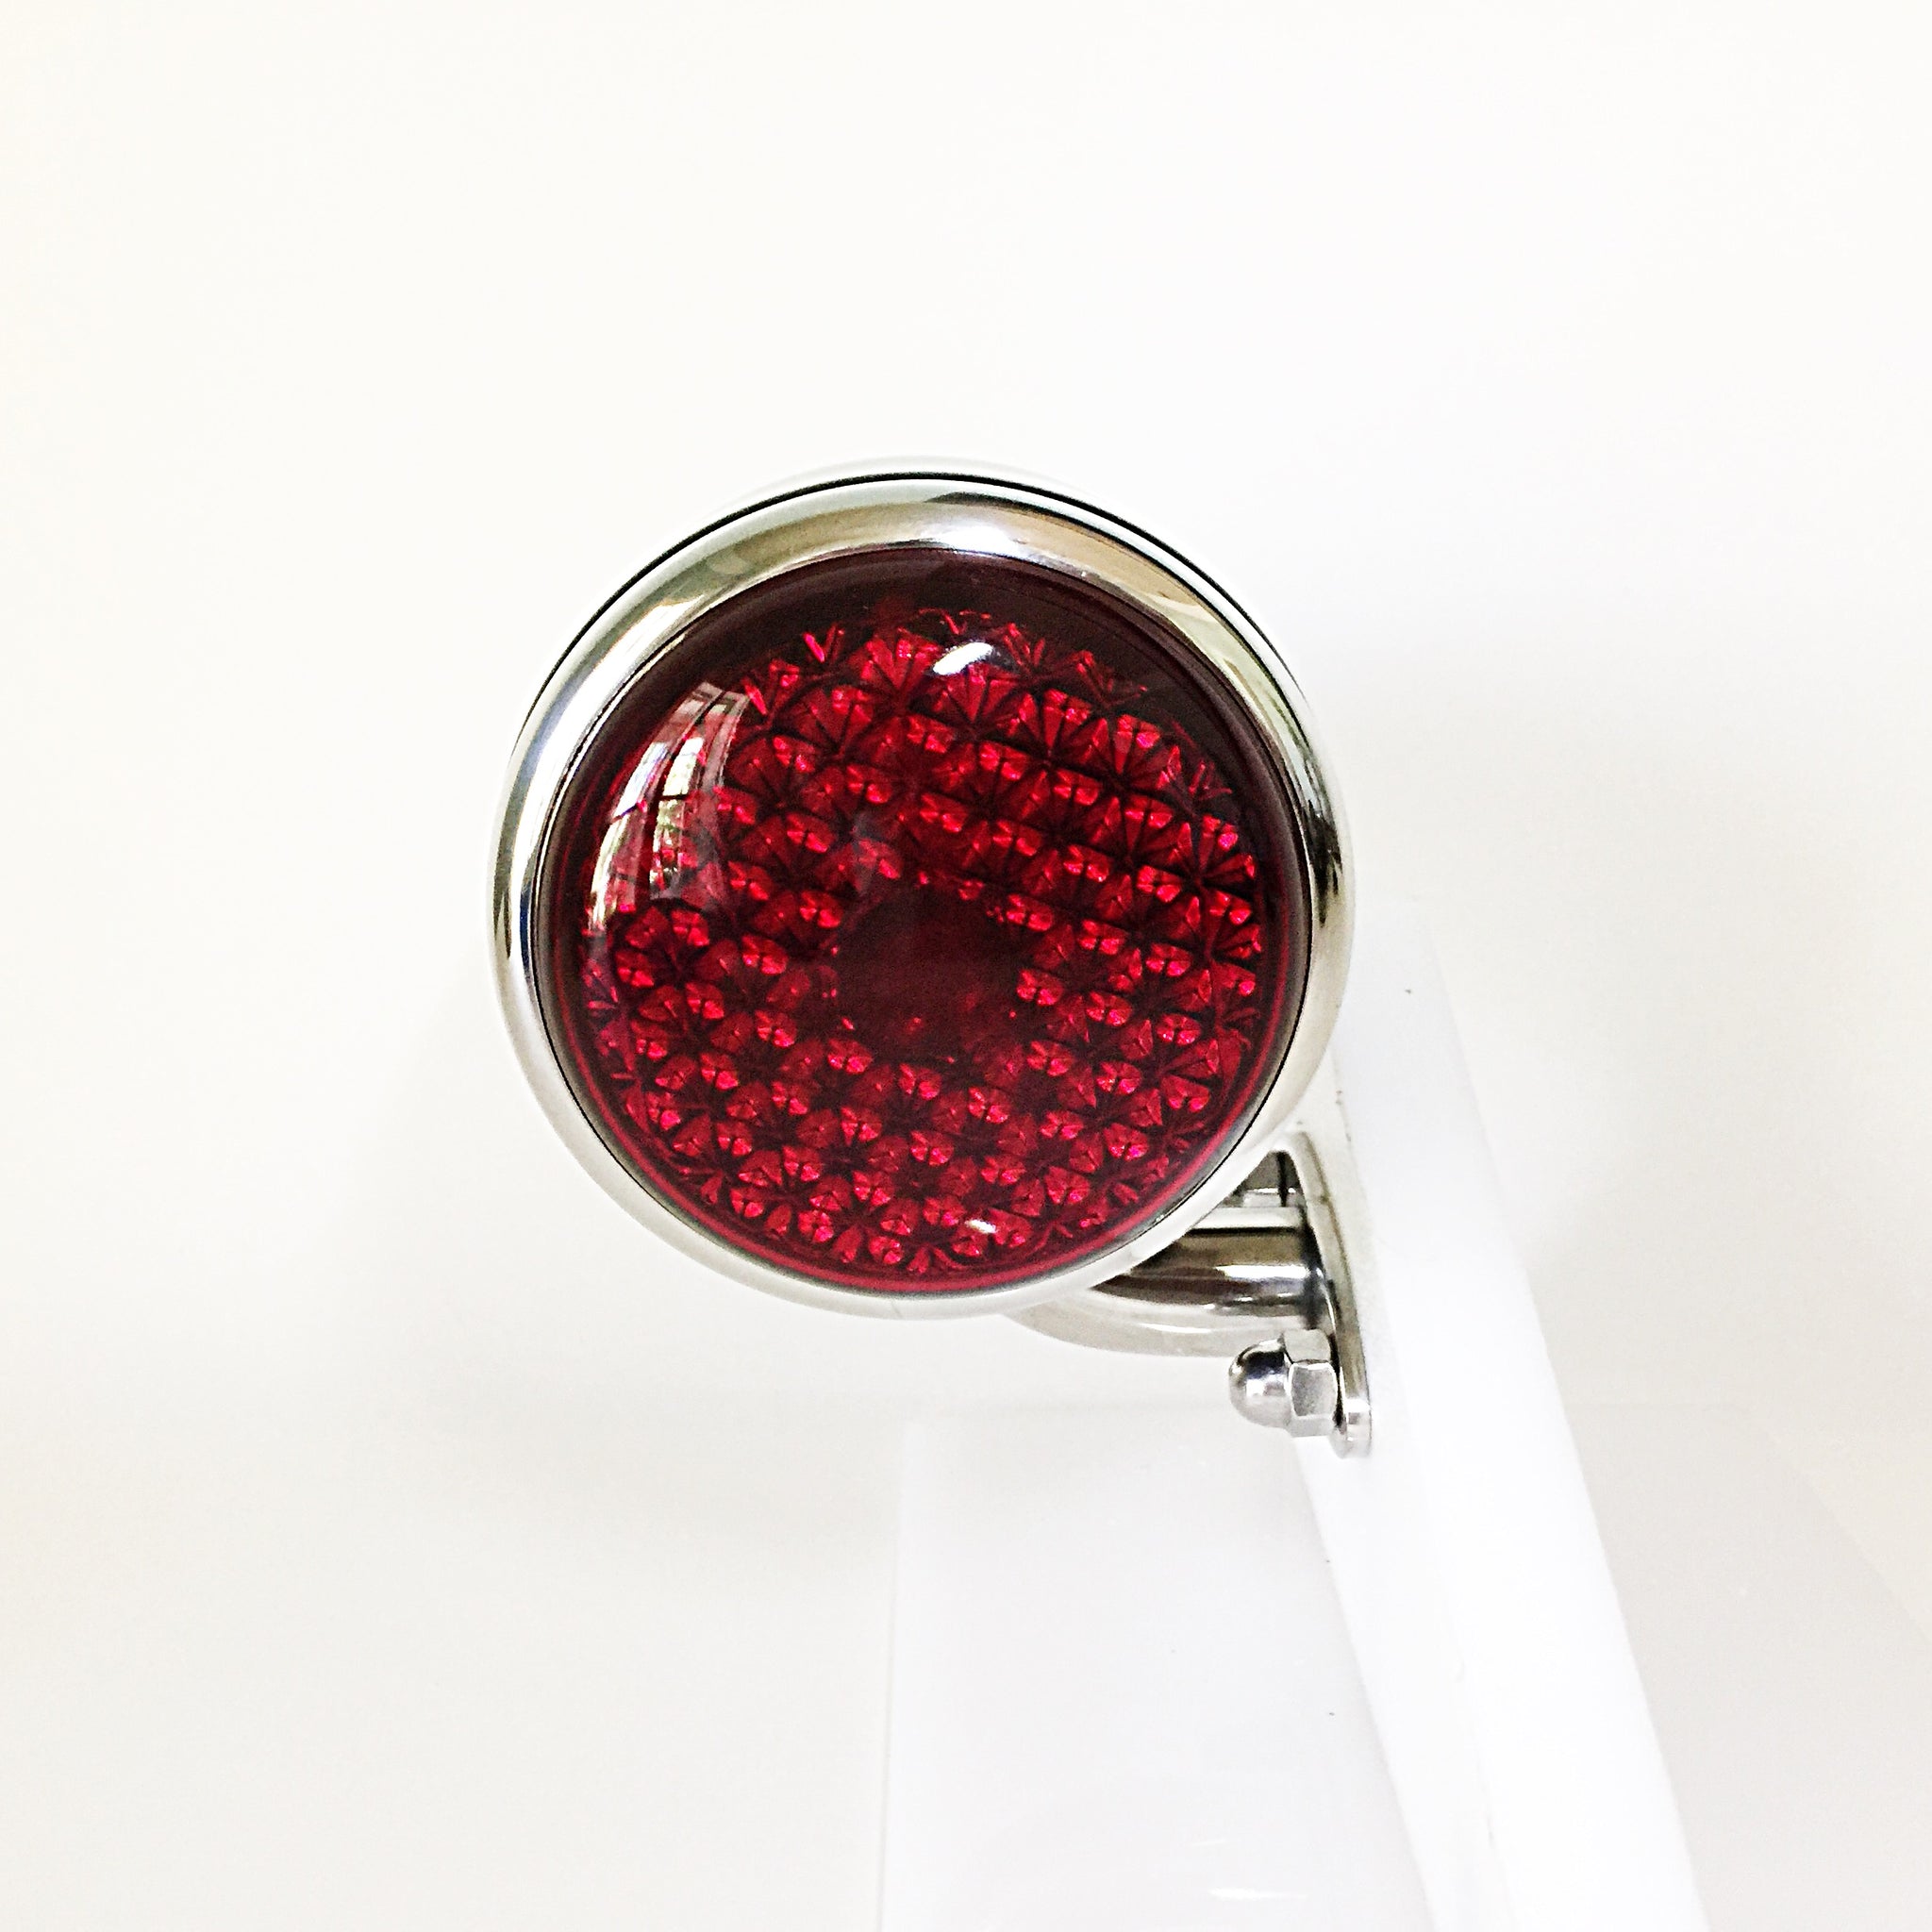 1937 Ford Tail Light.